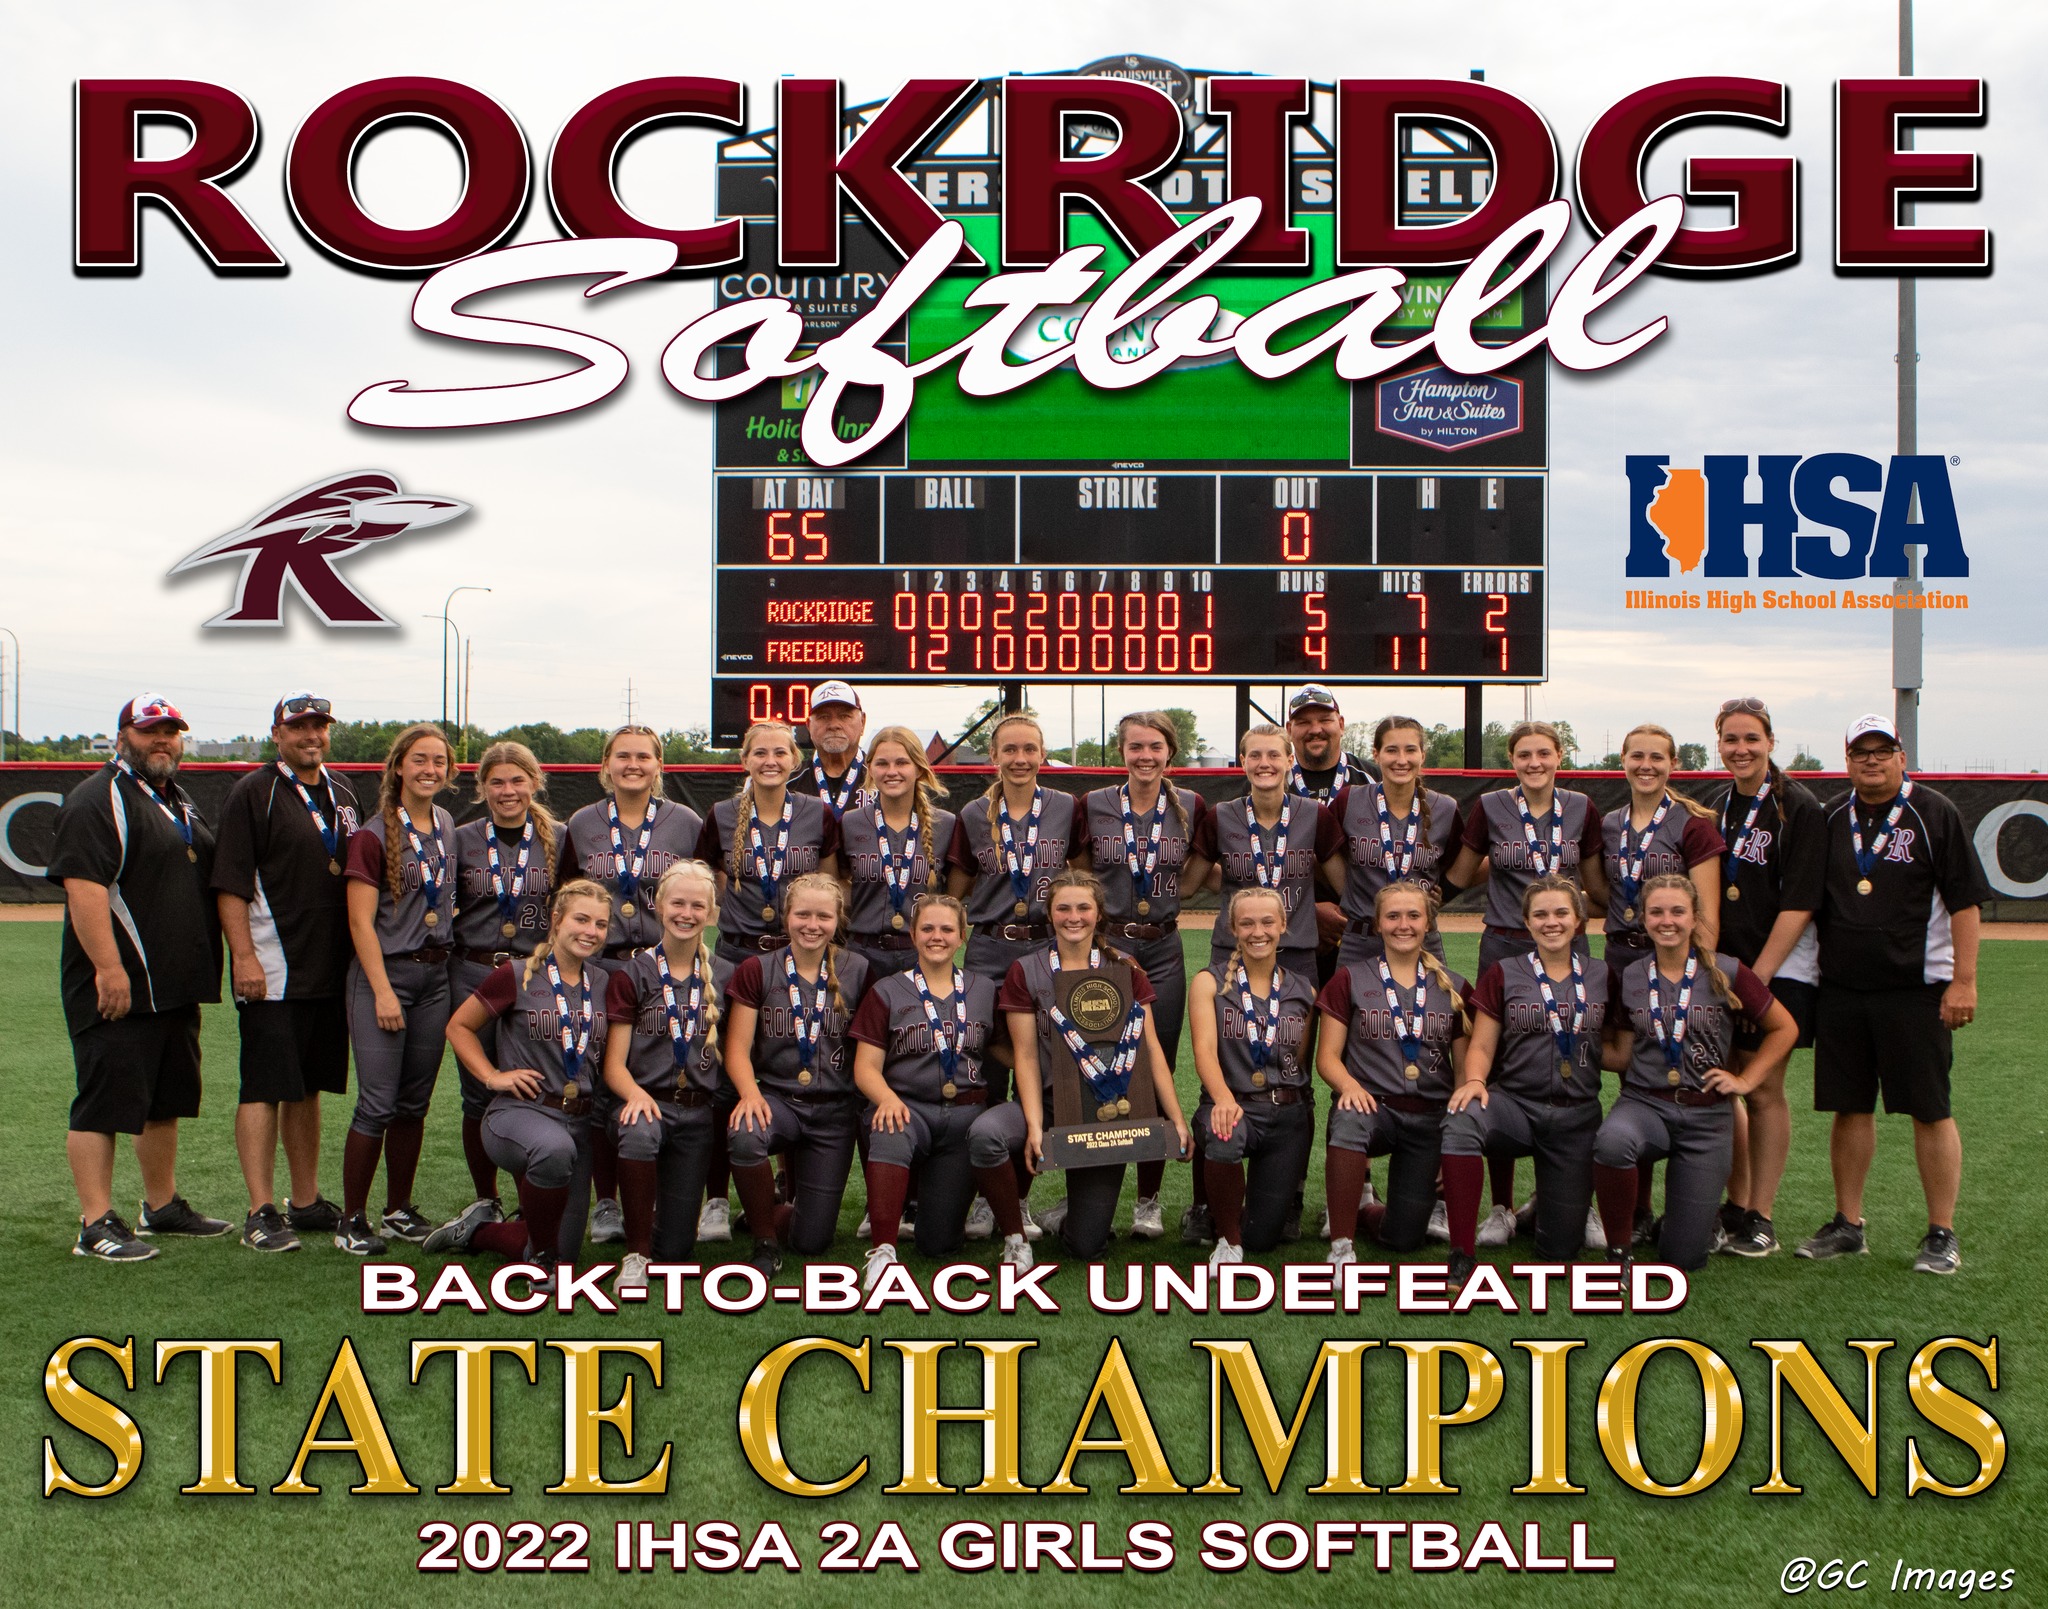 SB State Champs